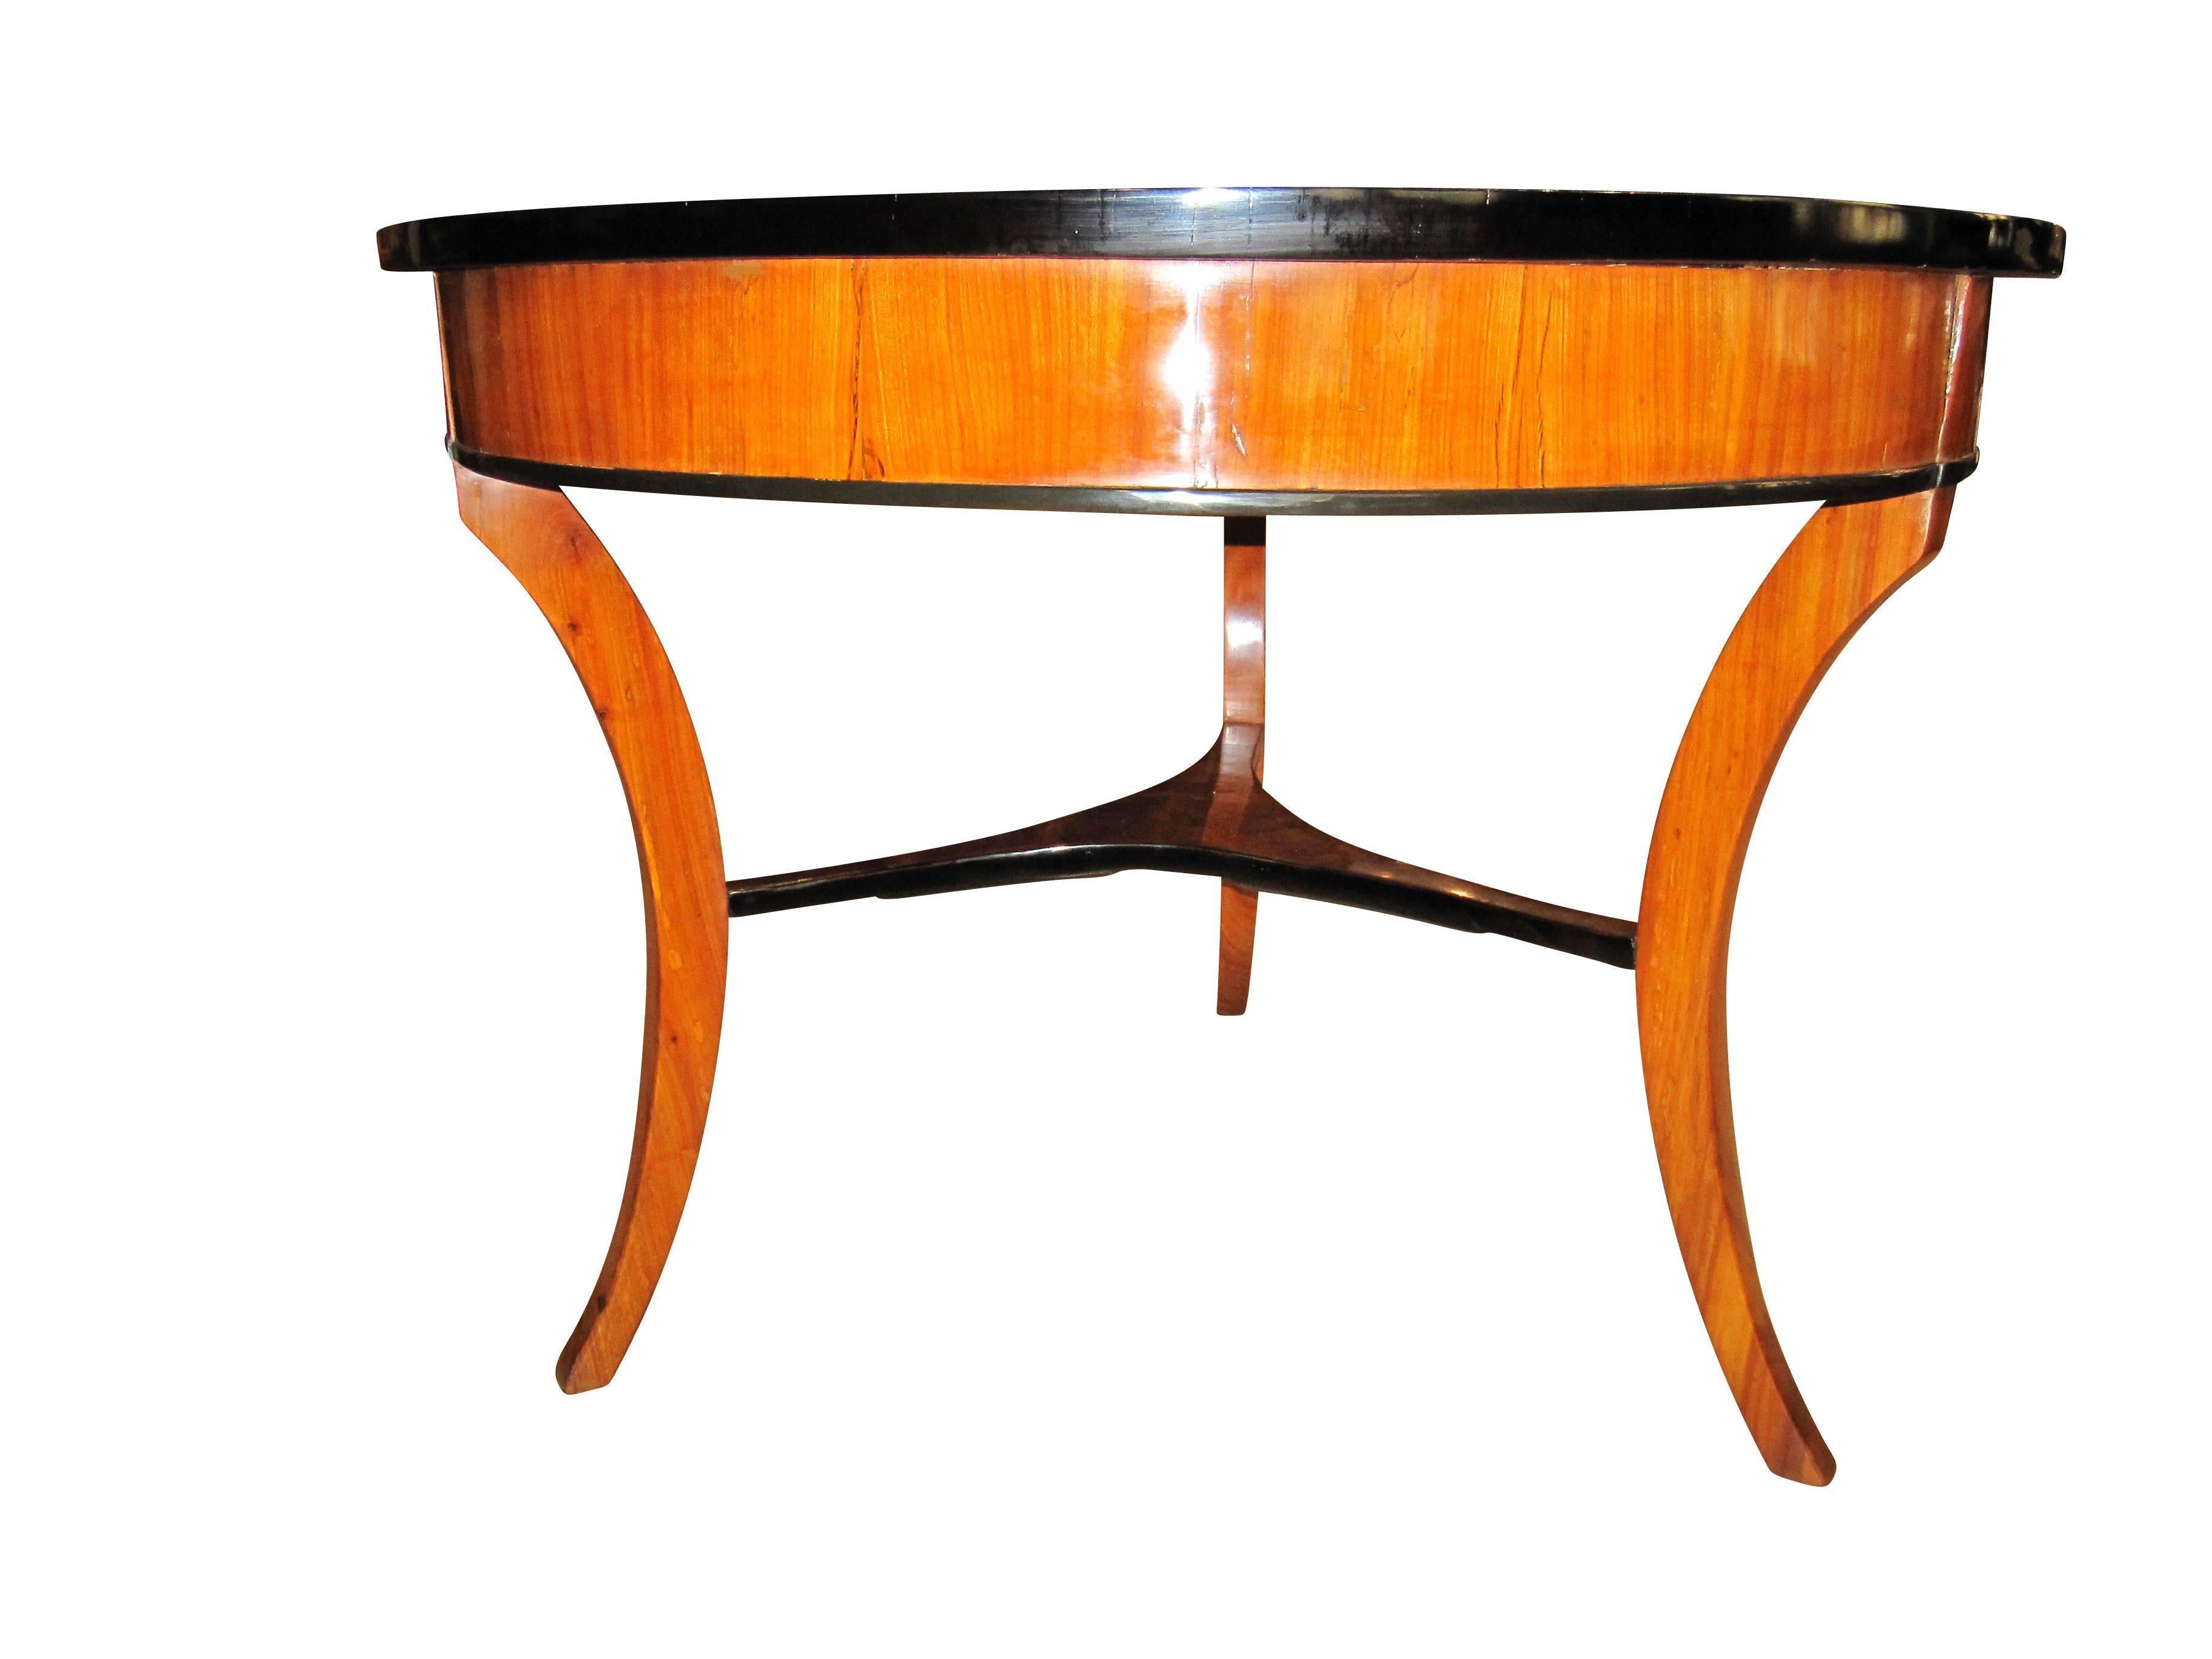 Elegant, round three-legged Biedermeier table. The plate is made with star-shaped cherry veneer. In the middle there is a circle made from elm-roots veneer and surrounded by a ebony inlay. Some parts like the tableau between the concave legs or the